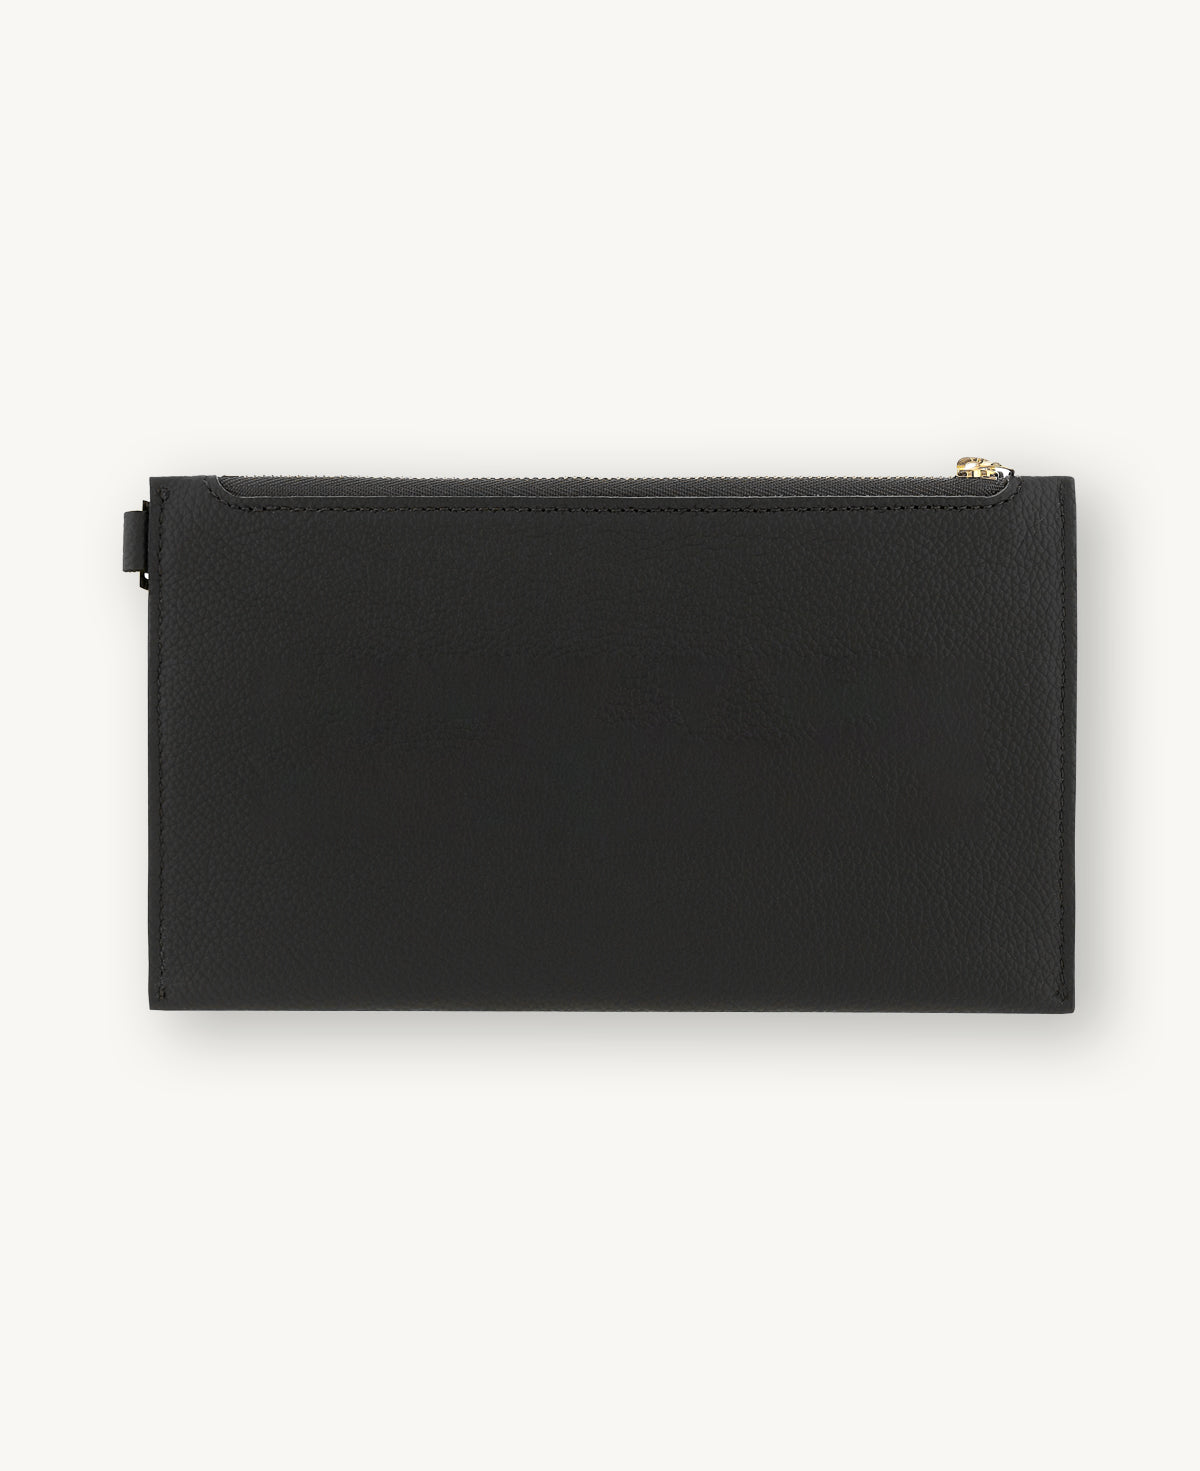 POUCH SMALL BLACK